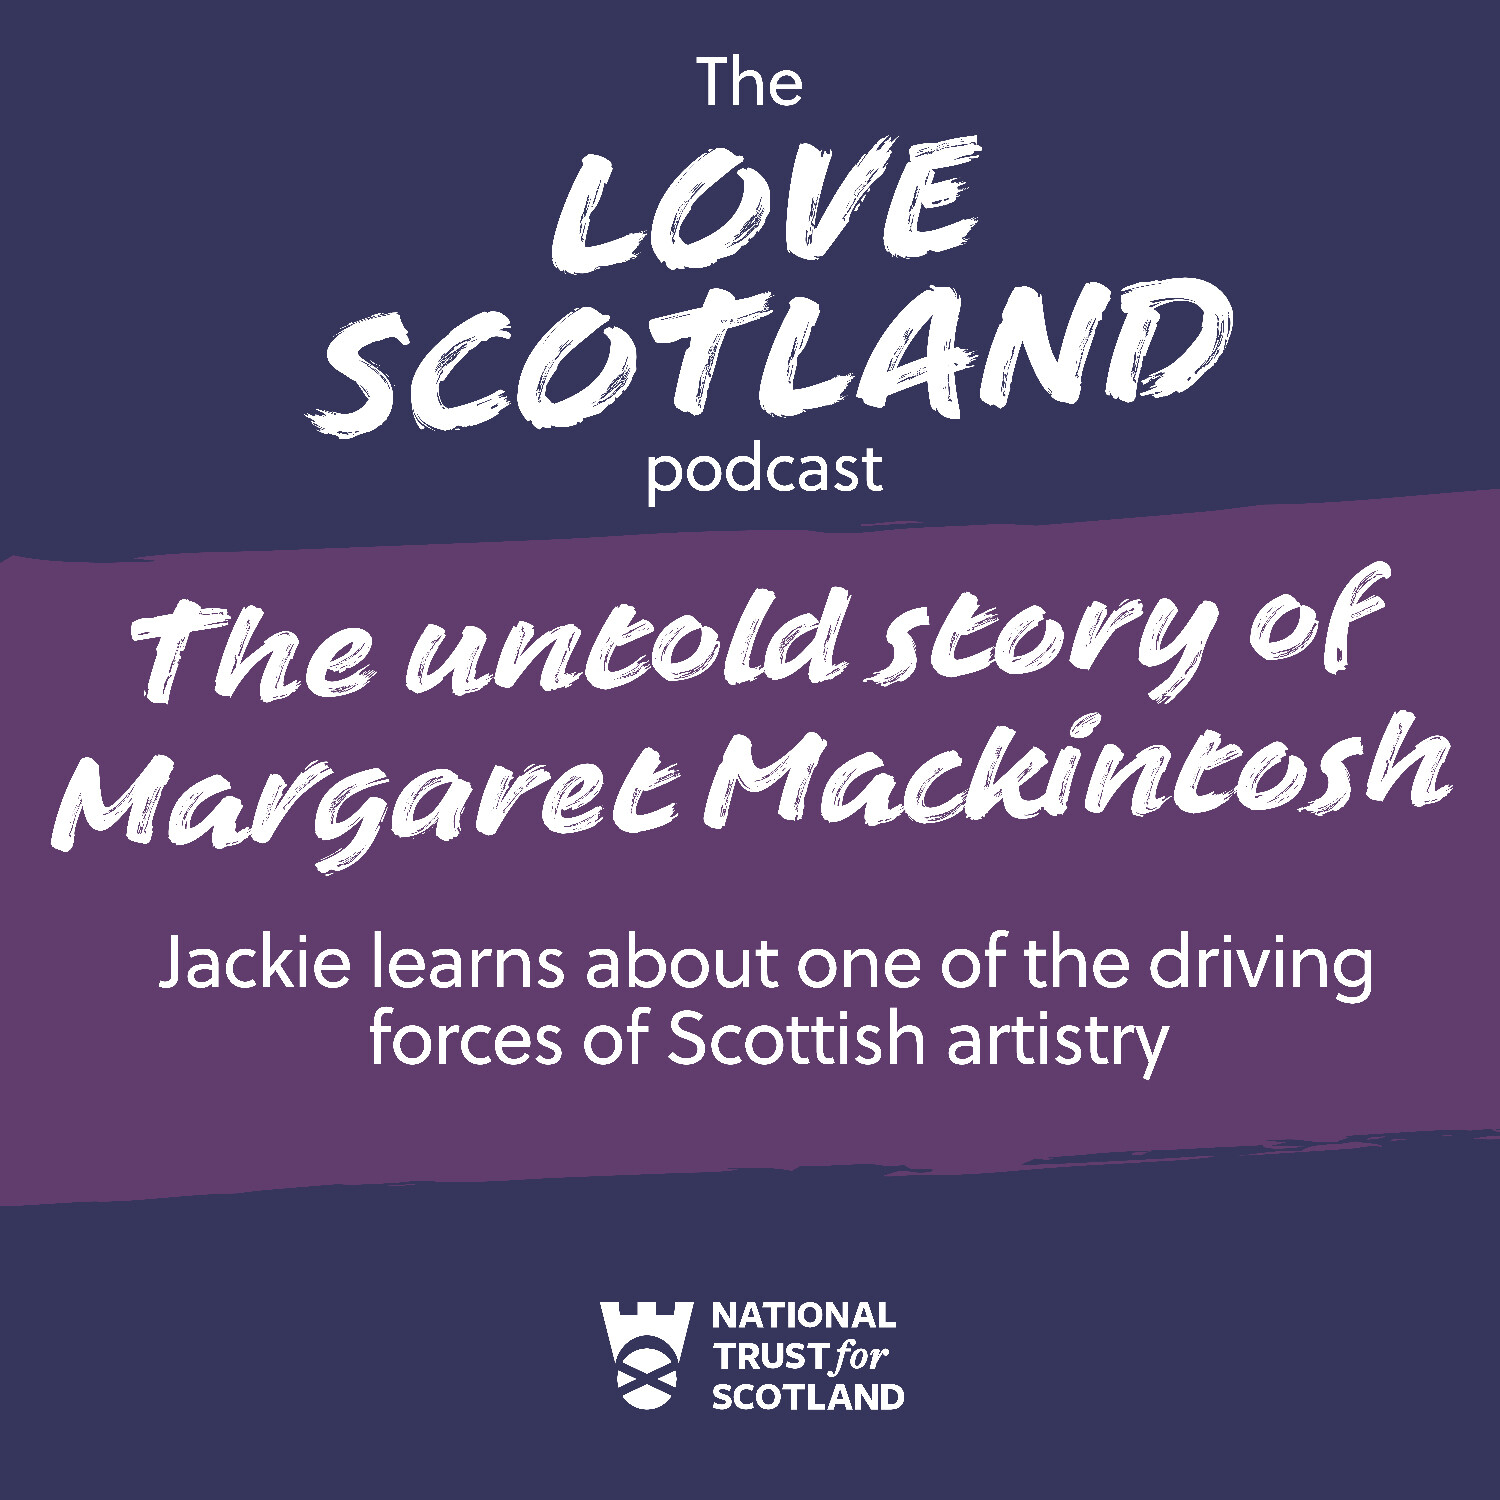 The story of Margaret Macdonald Mackintosh, and why the wife of architect Charles Rennie Mackintosh deserves equal recognition